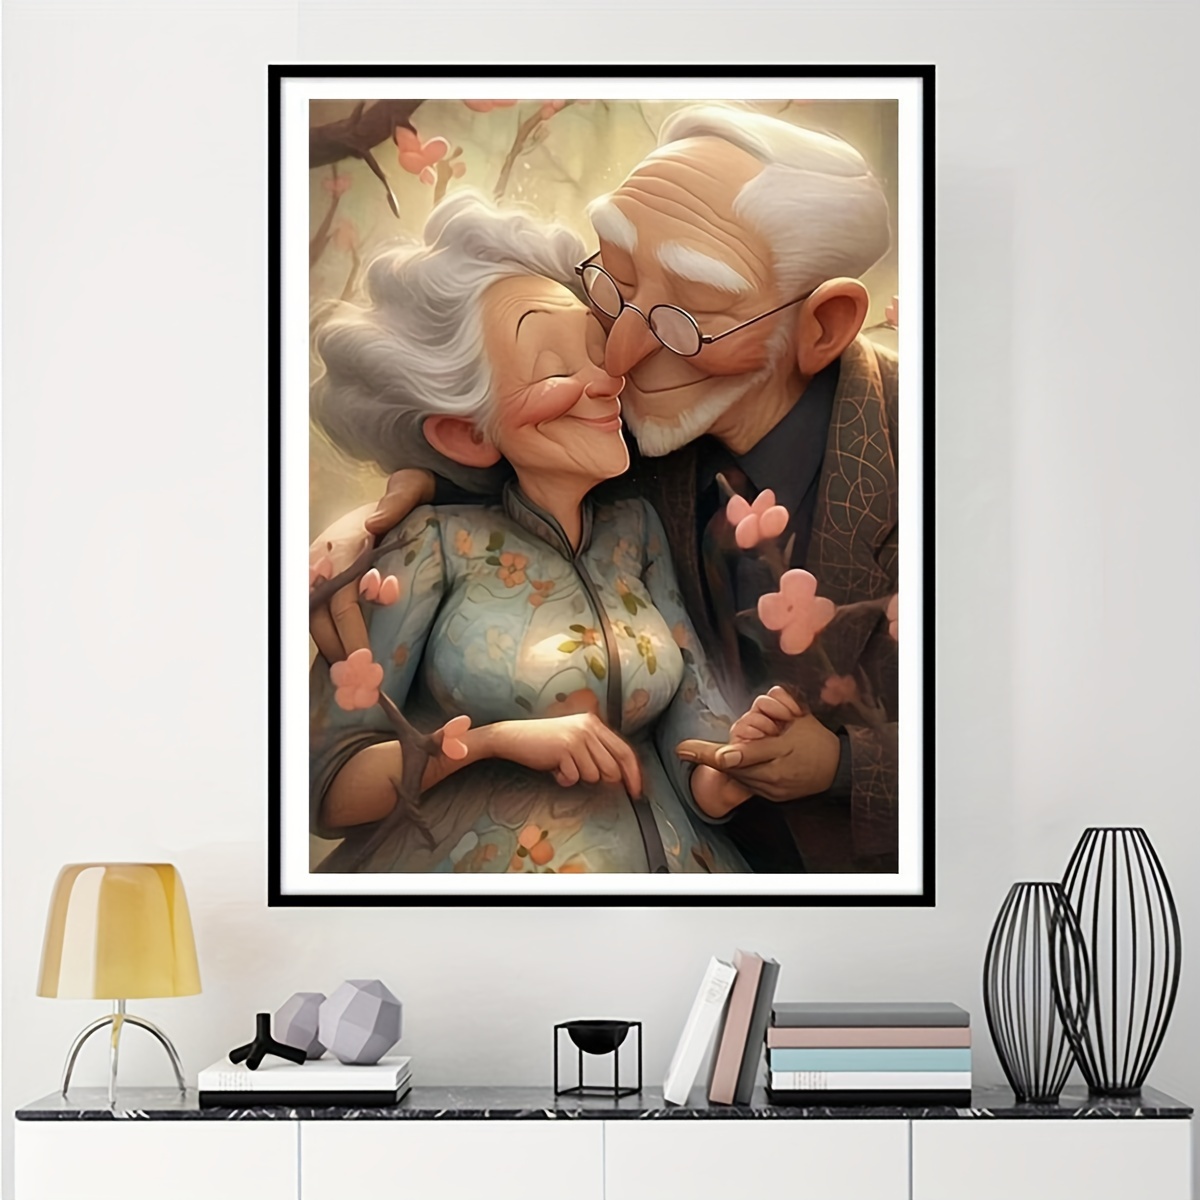 

Elderly Couple Embrace Diamond Painting Kit - 5d Diy Full Drill Acrylic Mosaic Art Set For Adults & Beginners - Easy To Use, Irregular Shaped Diamonds, Home Decor Craft, People Themed (30cm X 40cm)